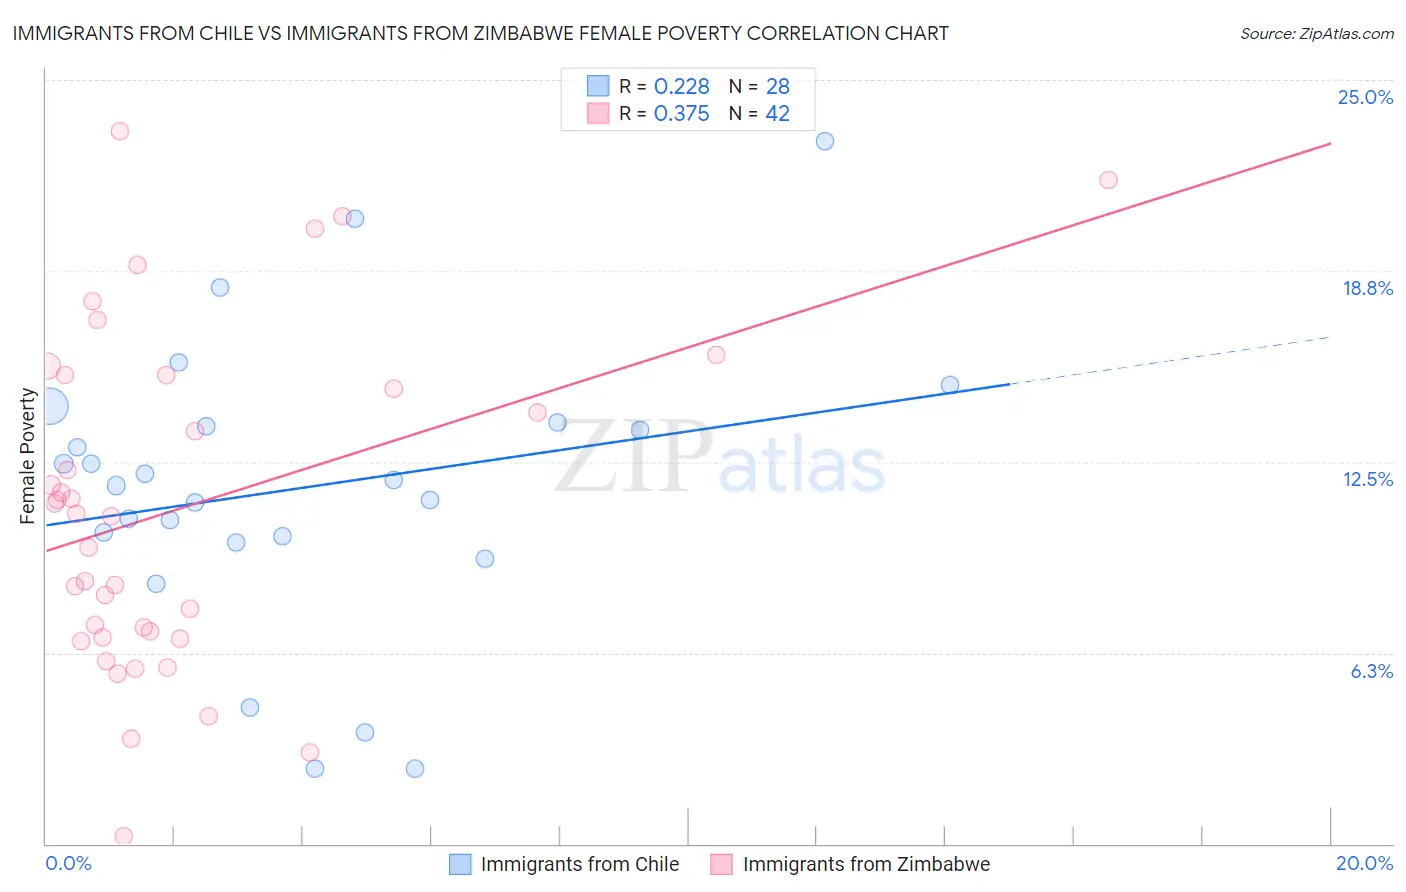 Immigrants from Chile vs Immigrants from Zimbabwe Female Poverty